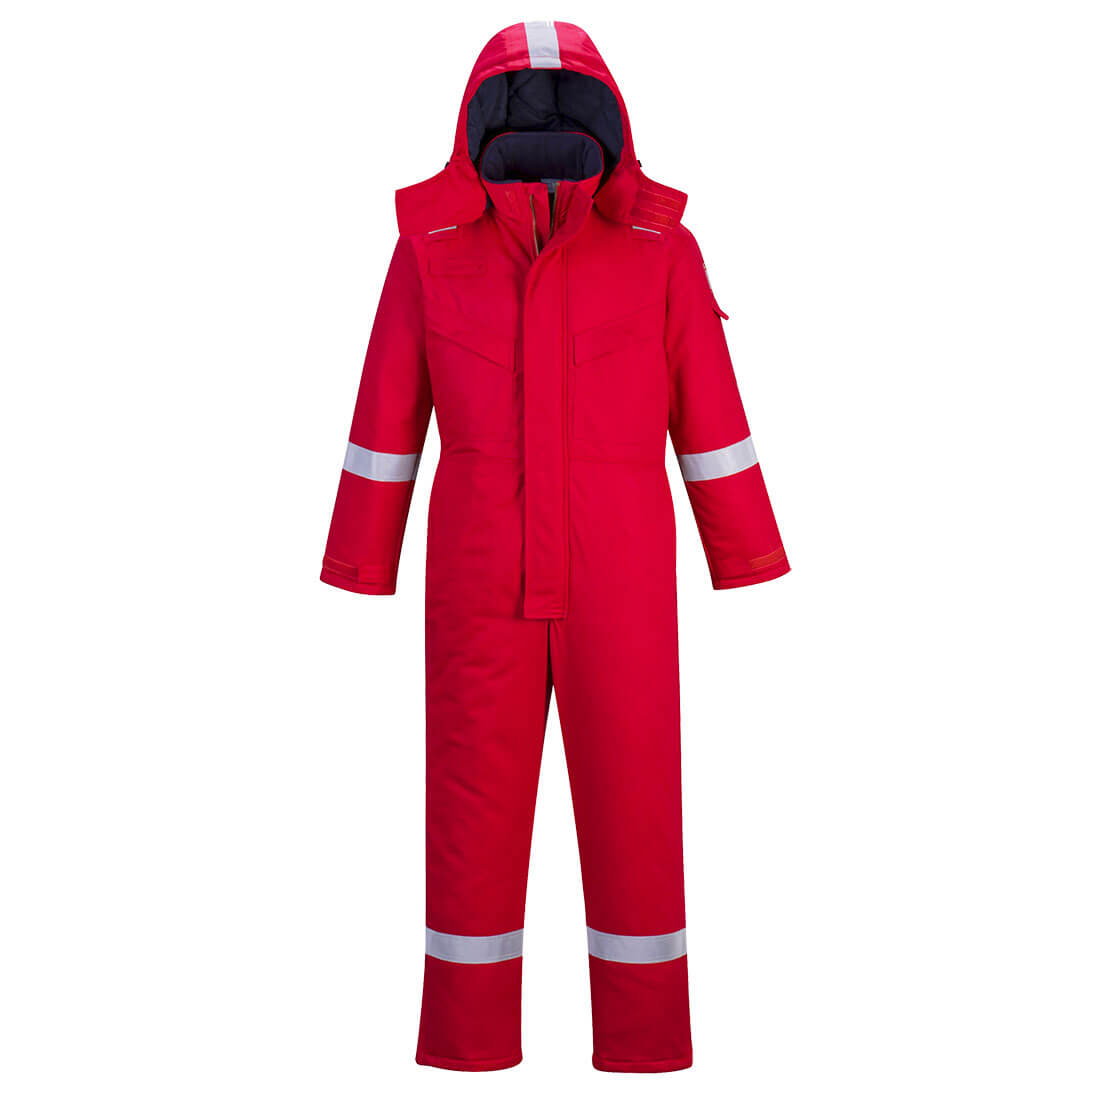 Image of Biz Flame Mens Flame Resistant Antistatic Winter Overall Red L 32"